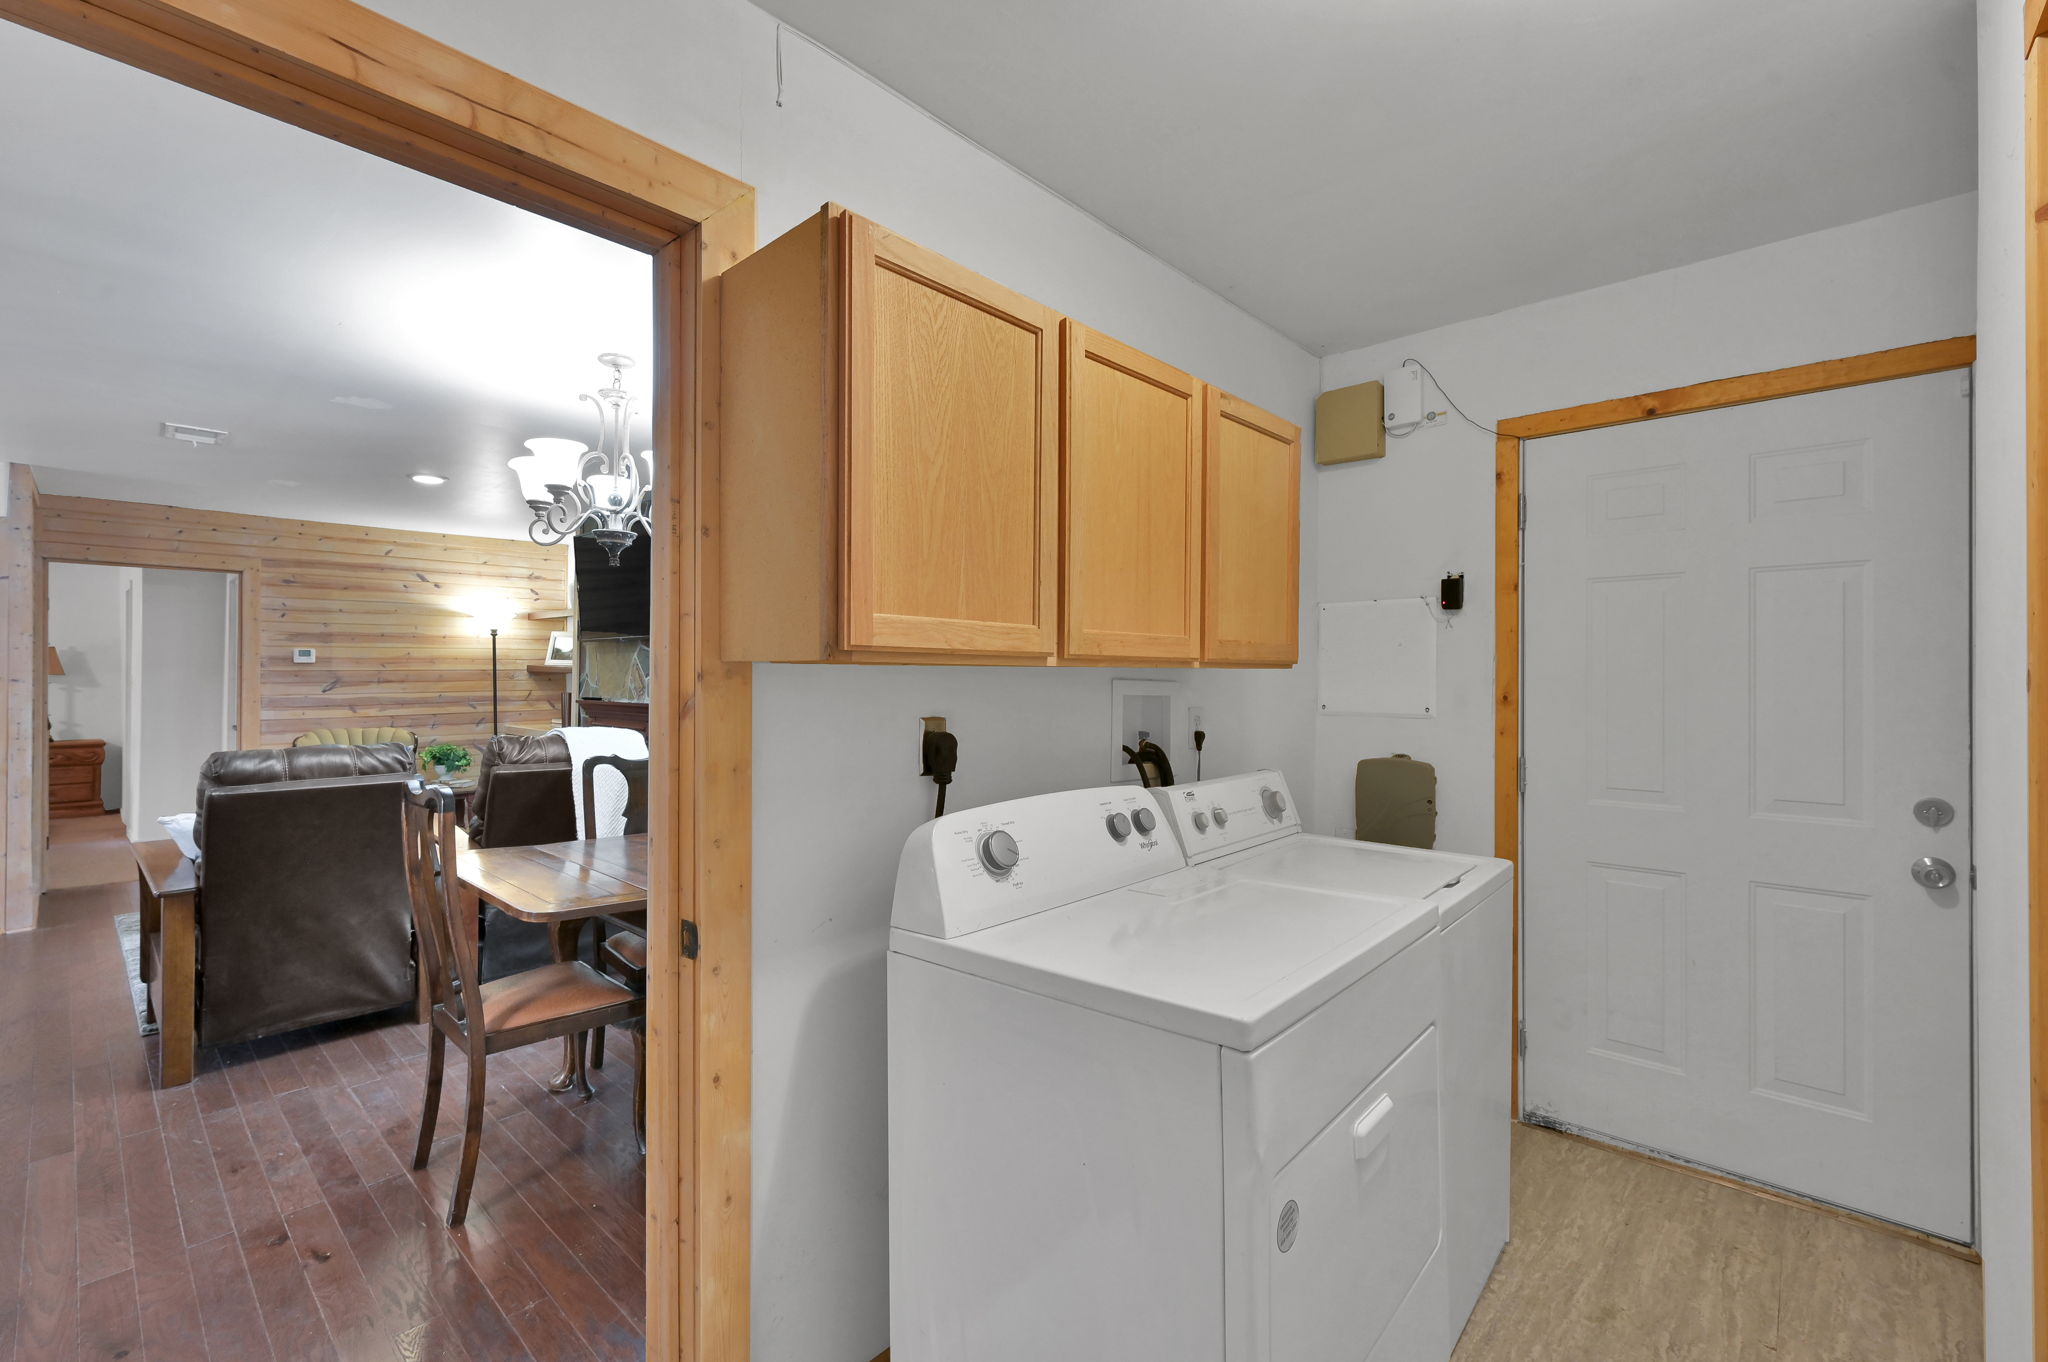 UTILITY ROOM w/ storage area above. Tankless H20 Heater is located in this room. Washer & Dryer included in the sale.